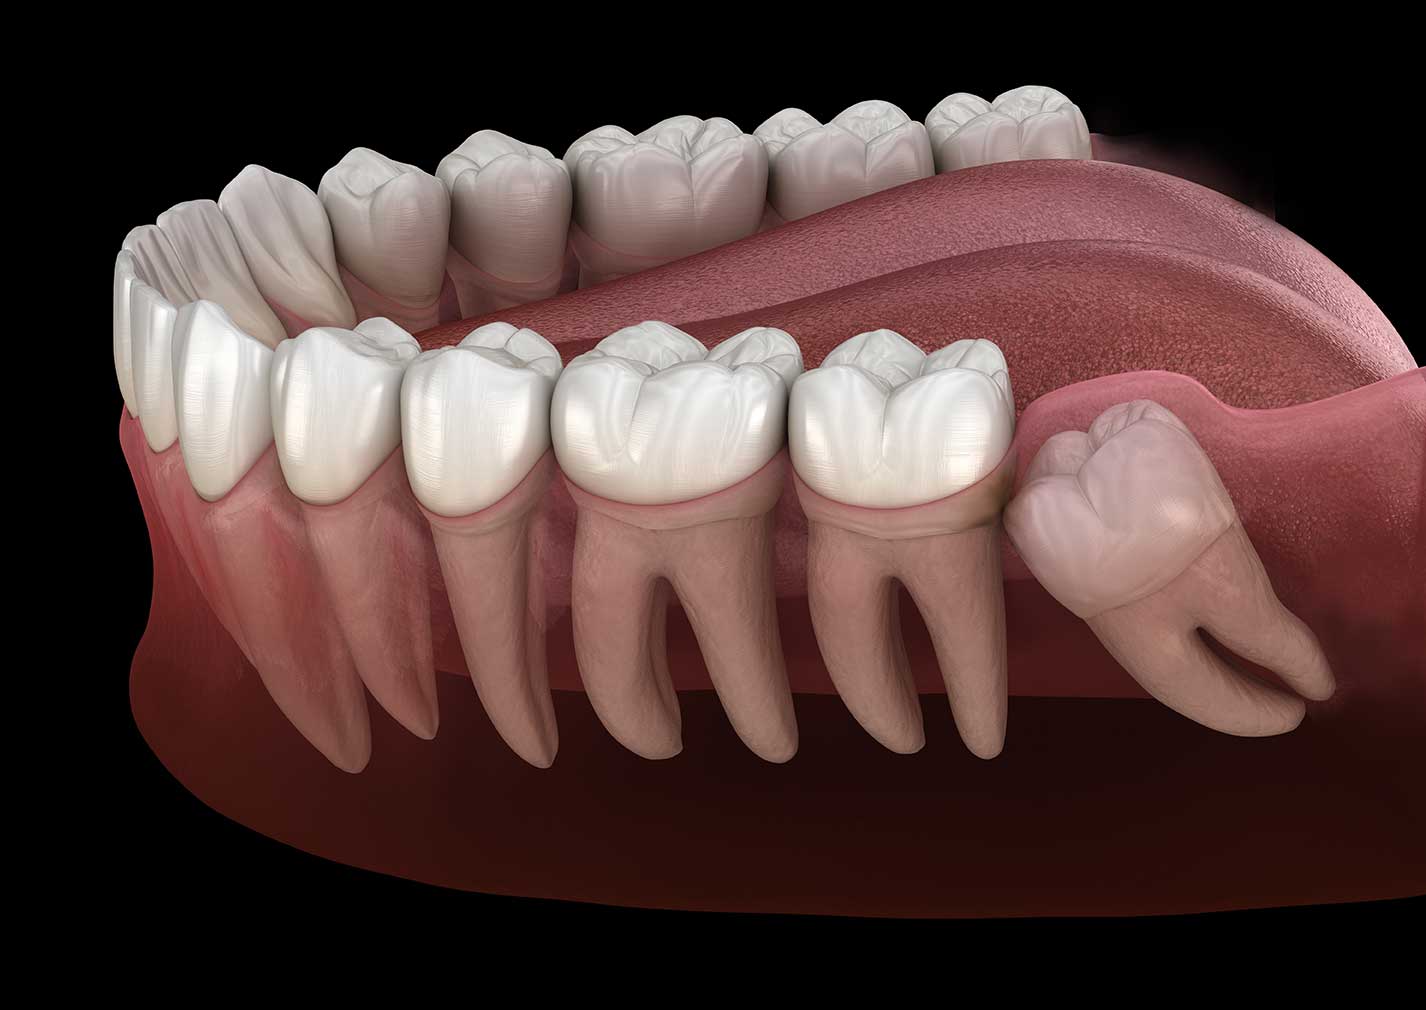 How Long Does Wisdom Tooth Growing Pain Last